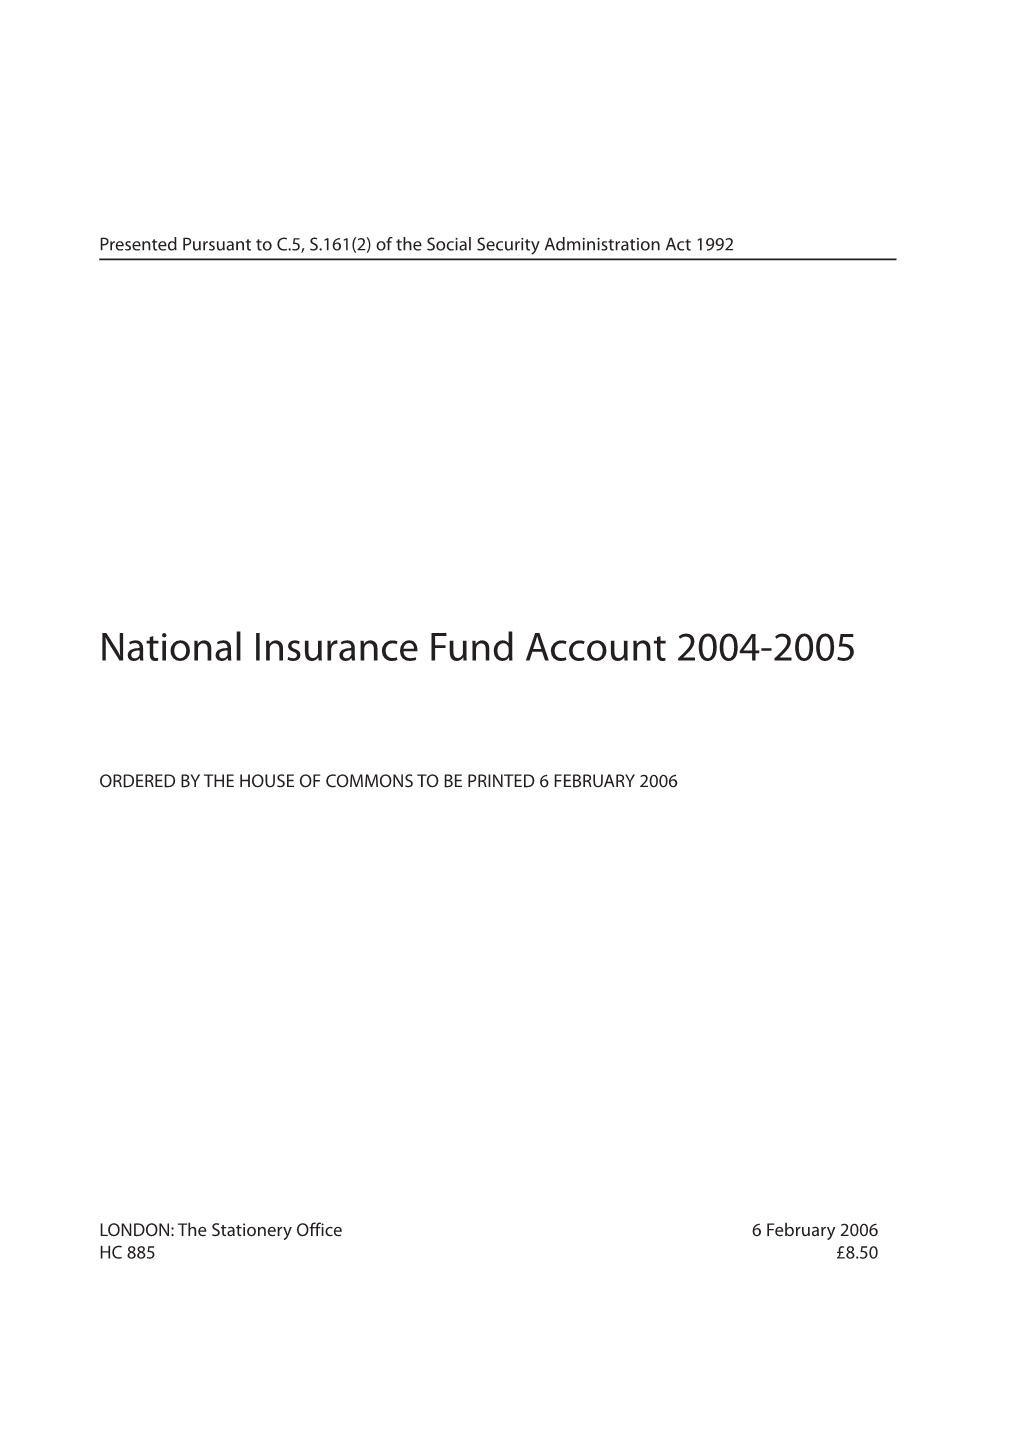 National Insurance Fund Account 2004-2005